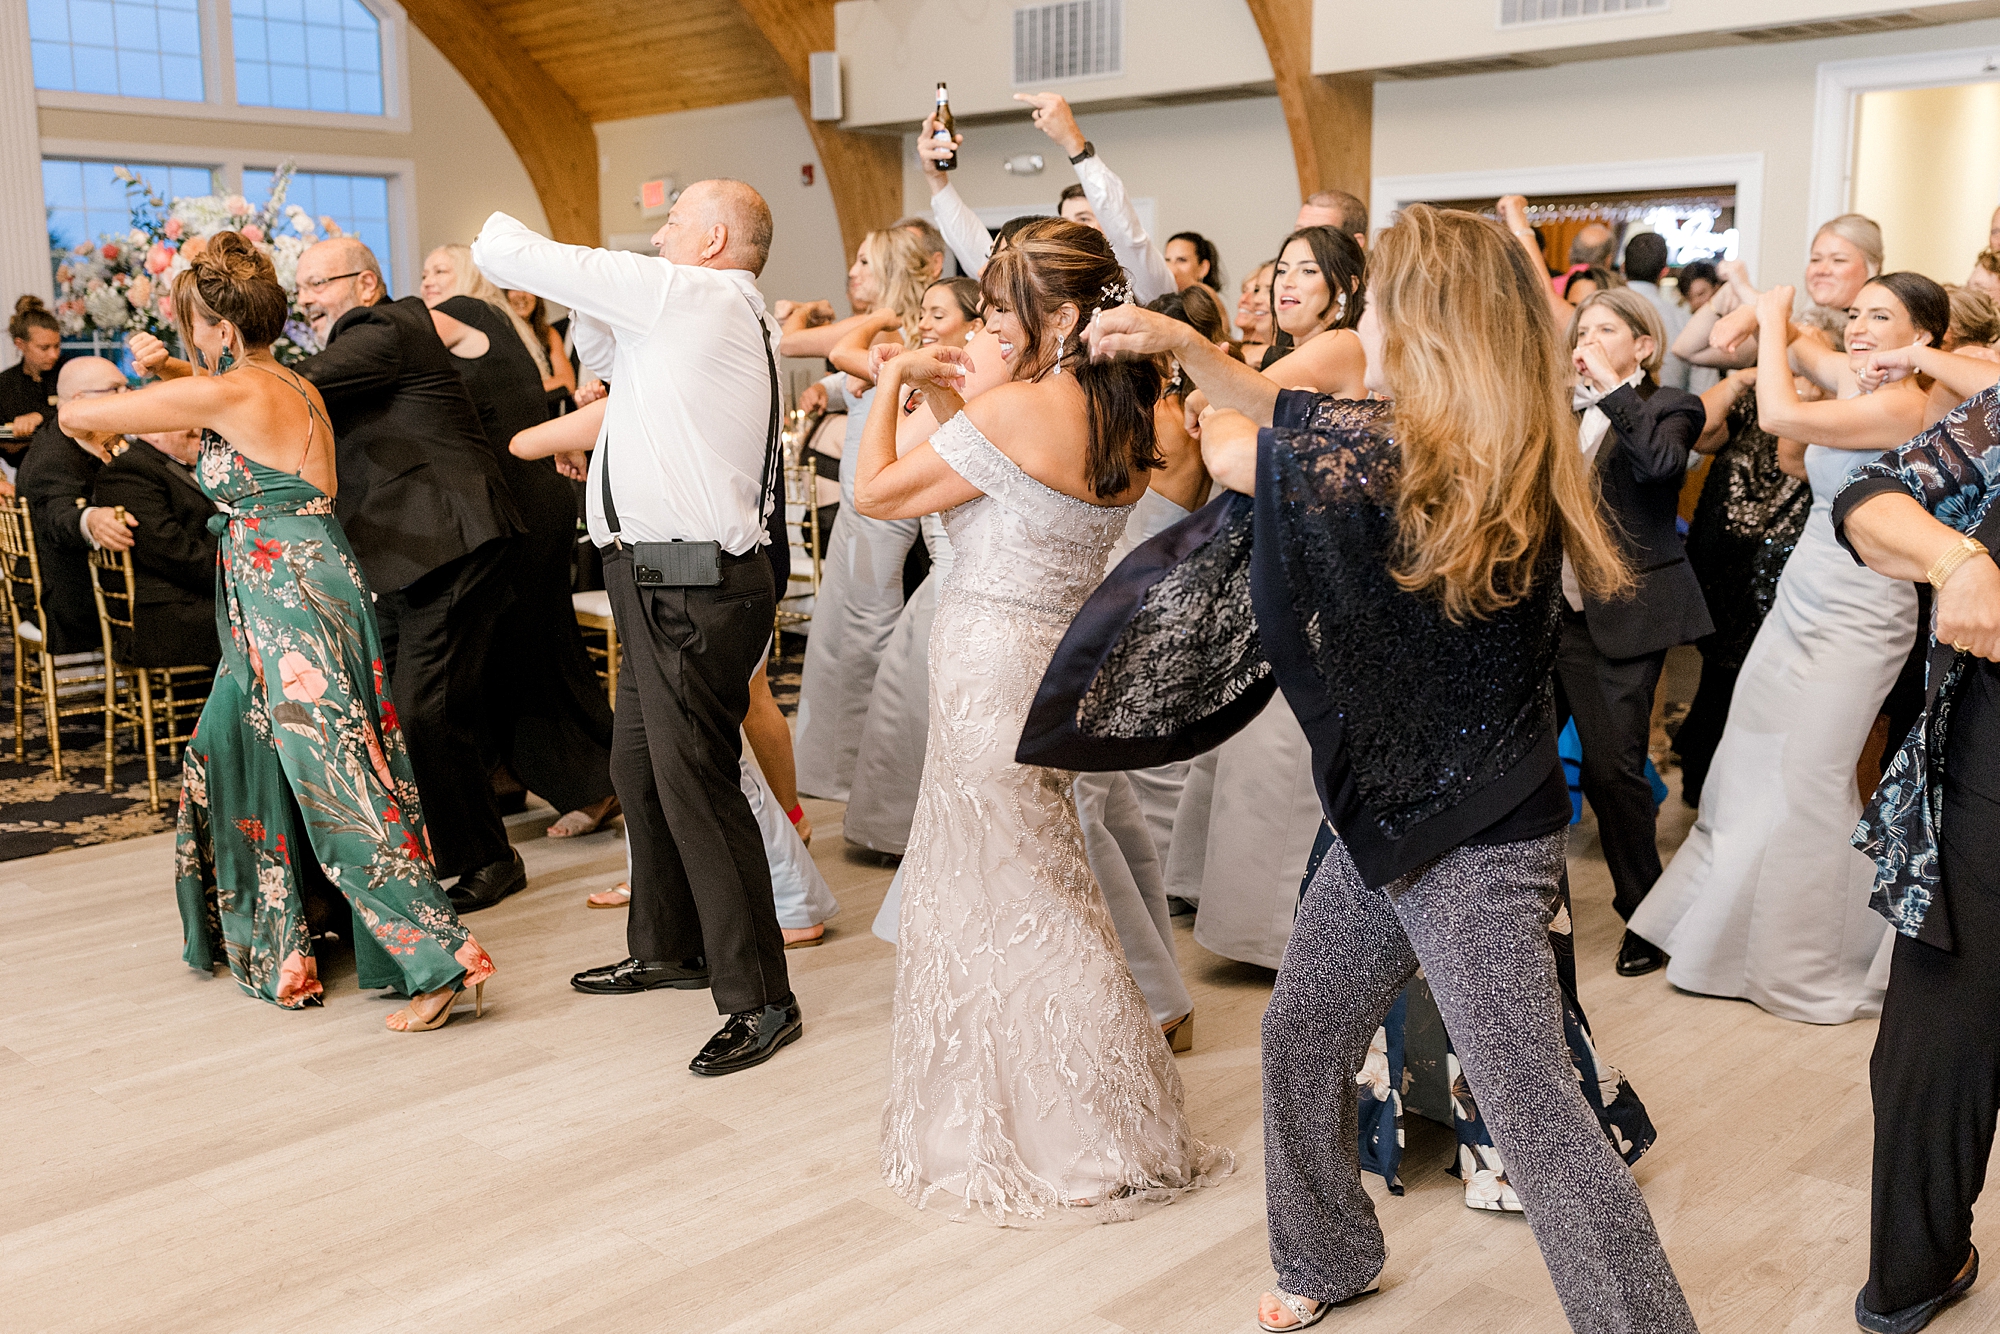 guests participate in flash mob for bride and groom at Bonnet Island Estate wedding reception